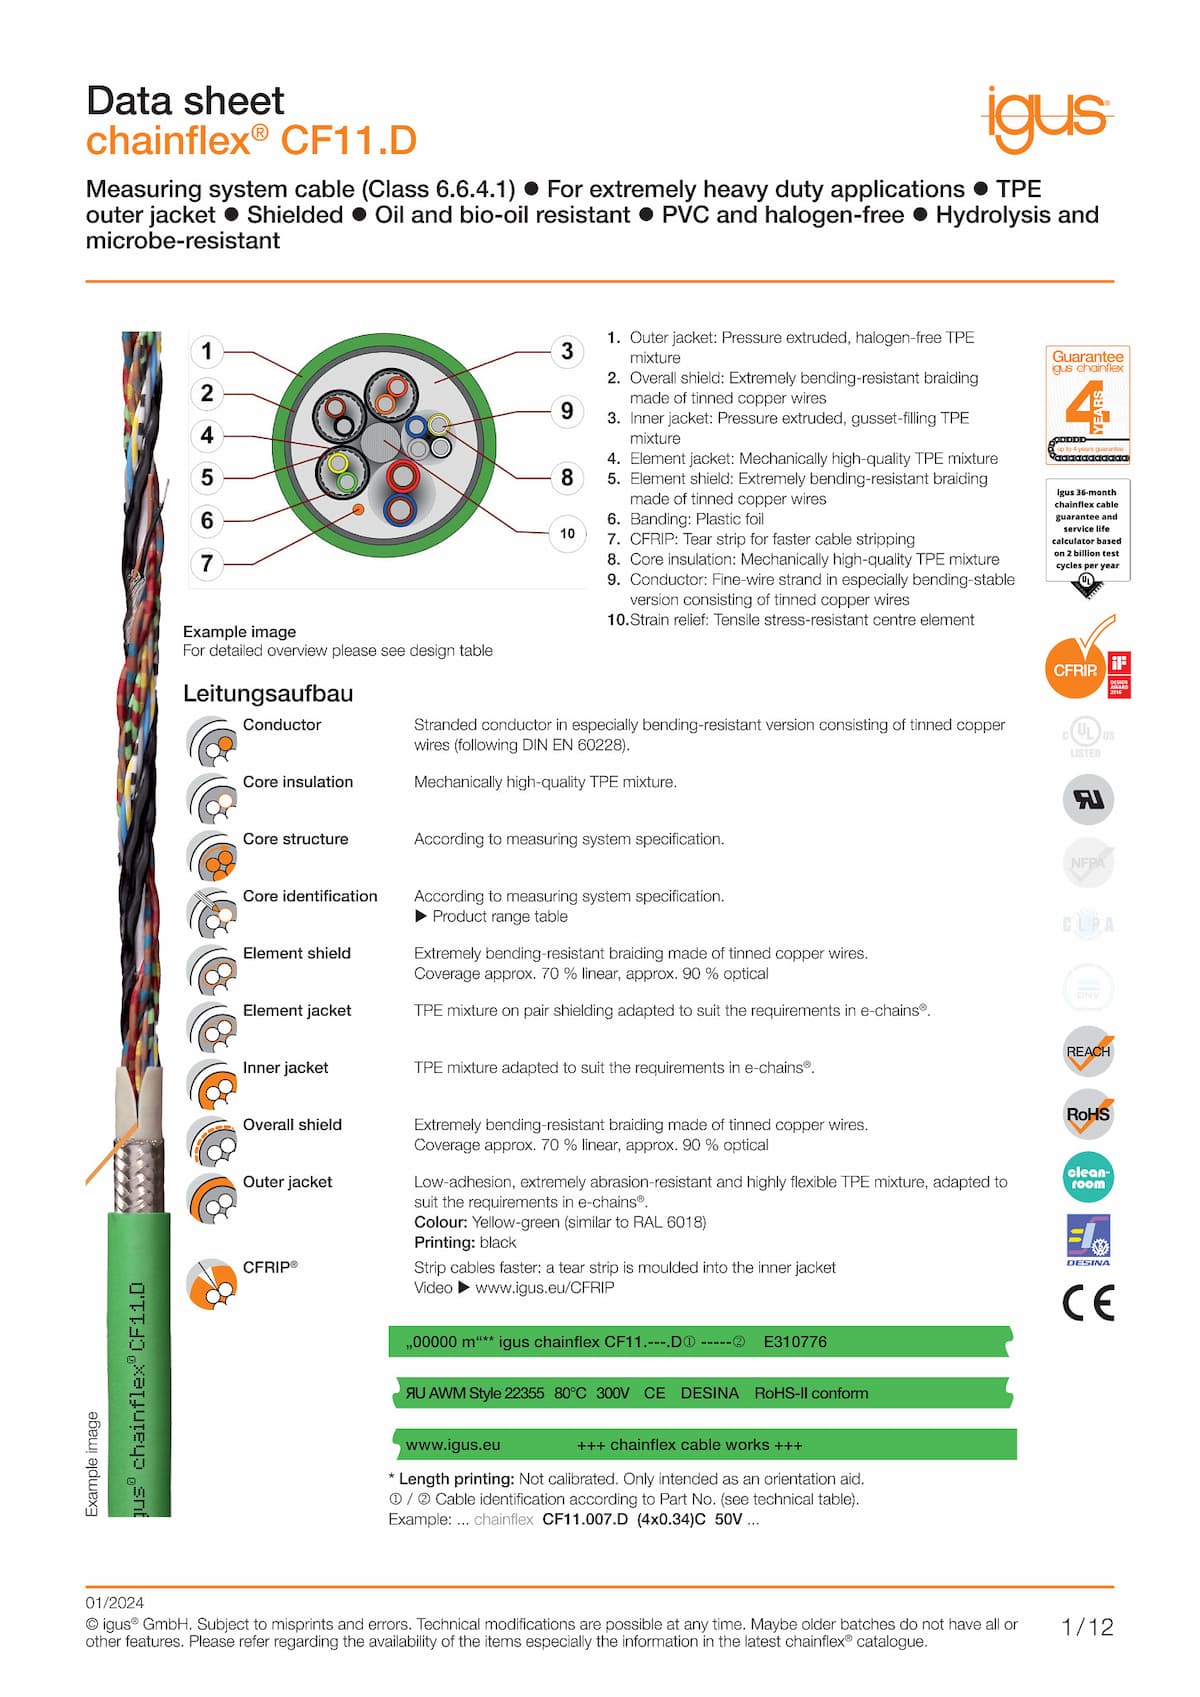 Technical data sheet chainflex® measuring system cable CF11.D